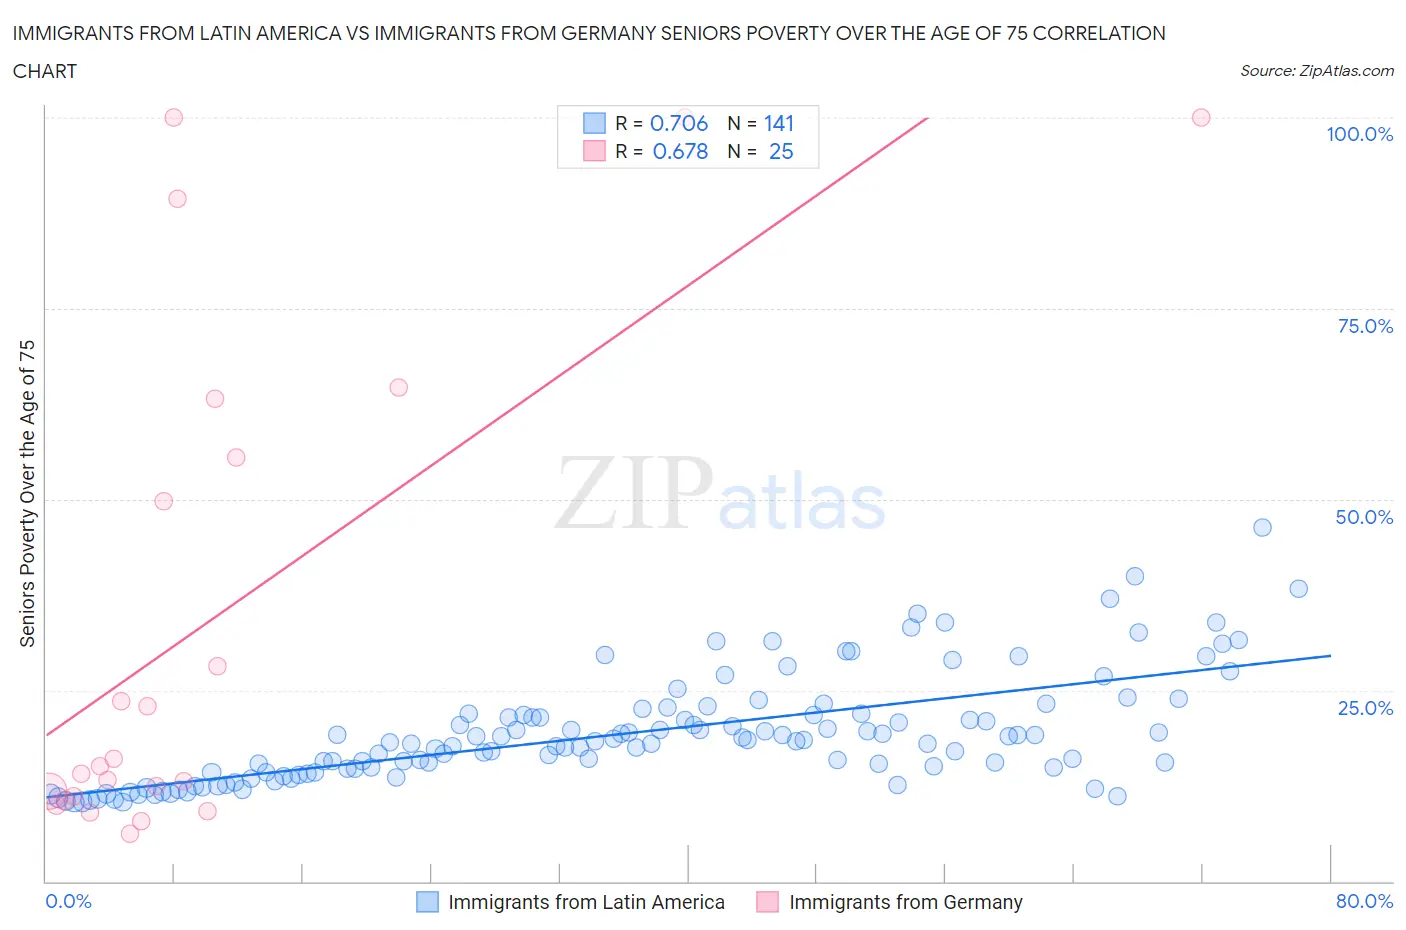 Immigrants from Latin America vs Immigrants from Germany Seniors Poverty Over the Age of 75